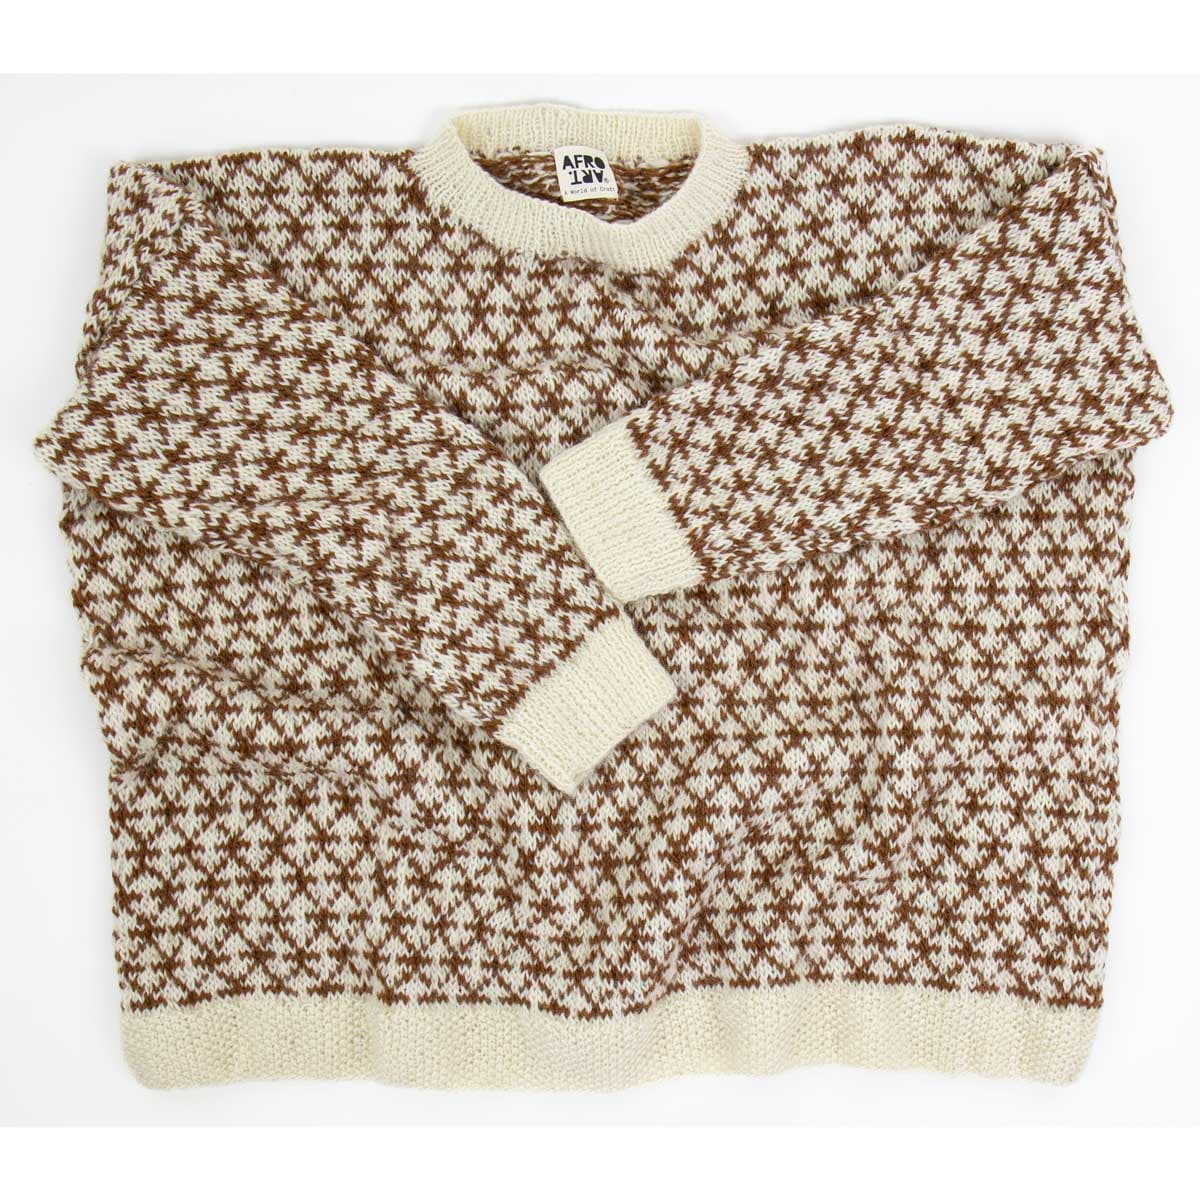 KNITS/23 Sweater one size, white/brown